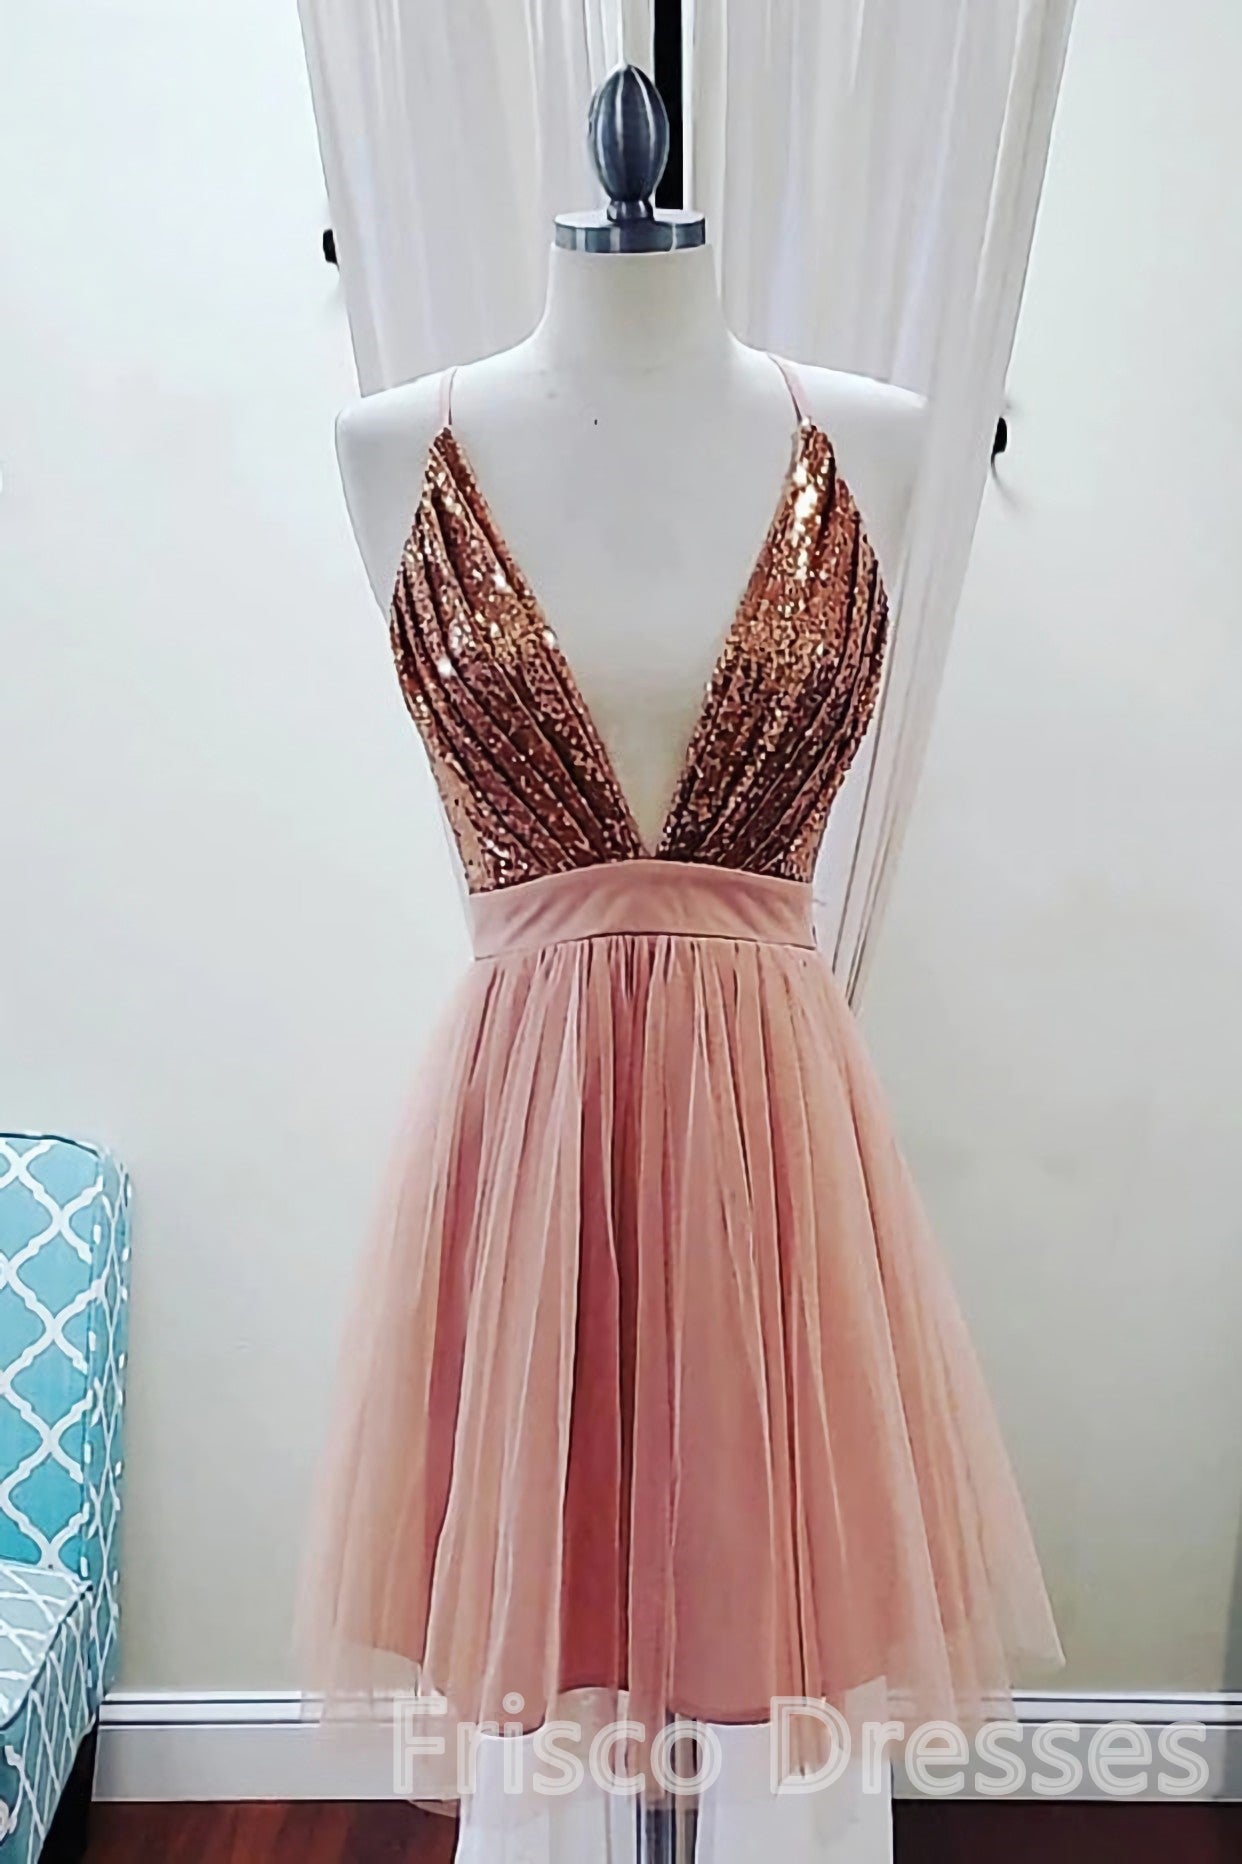 Party Dress And Gown, Deep V-neck Spaghetti Straps Sleeveless Sequins Short Prom Dresses, Homecoming Dresses